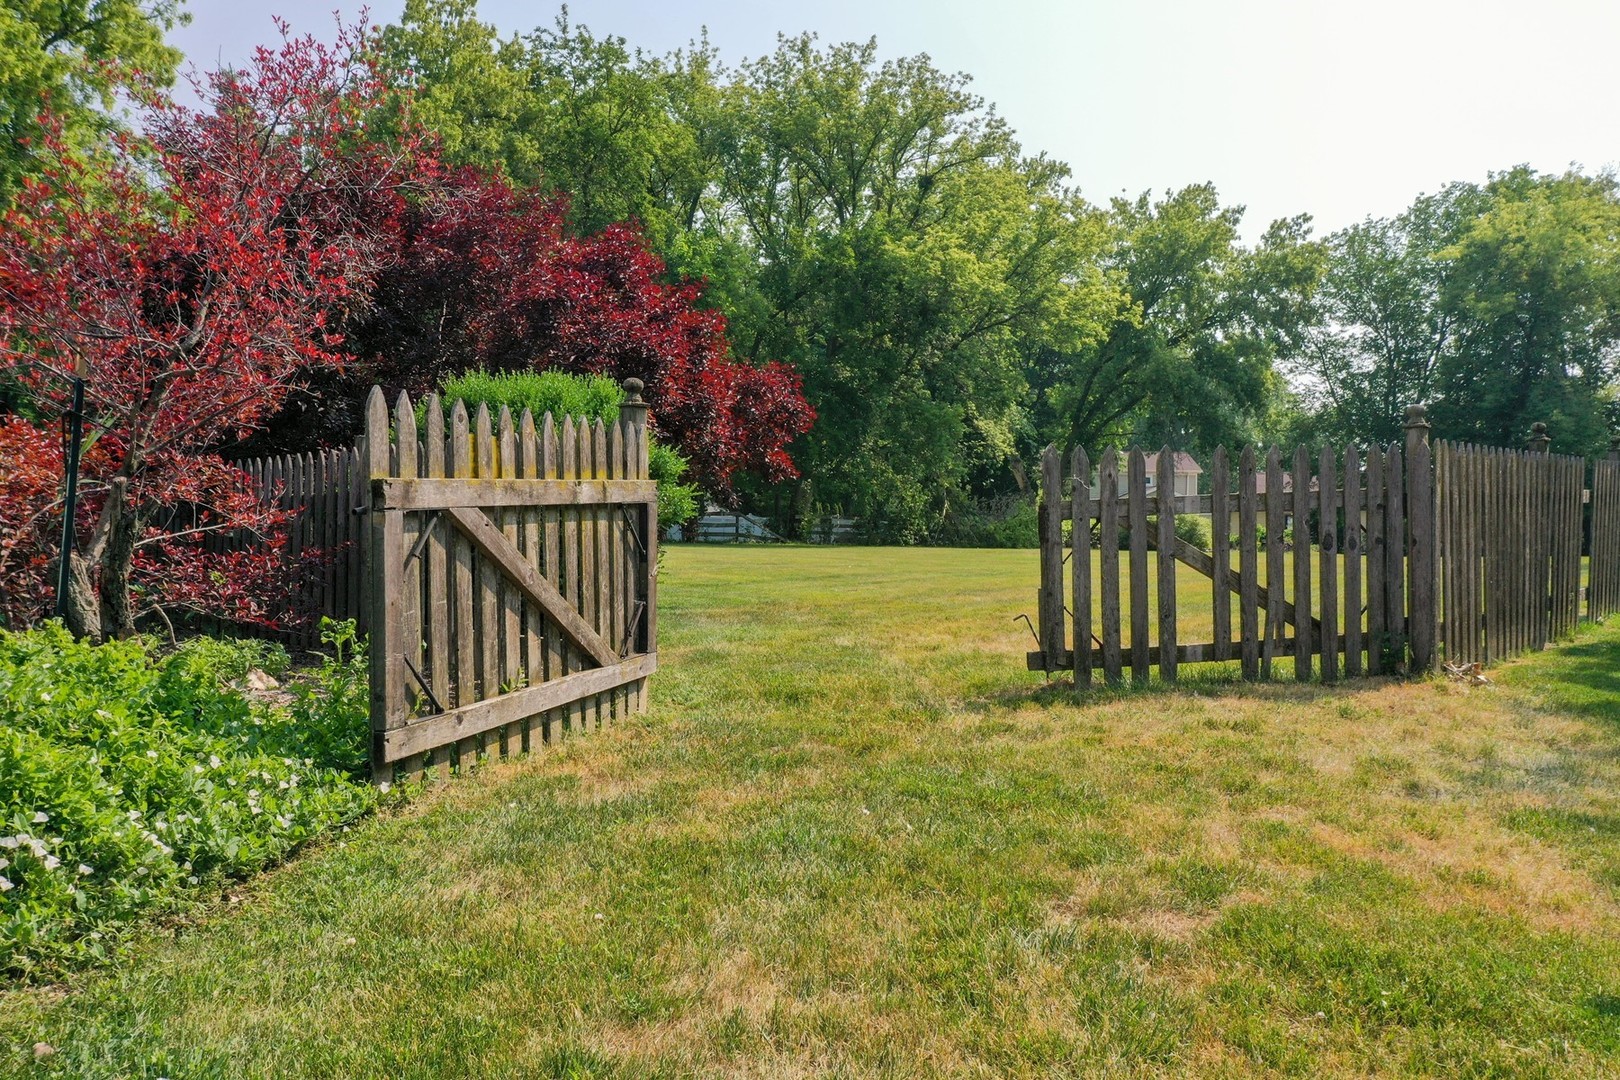 a view of backyard with wooden fence and trees